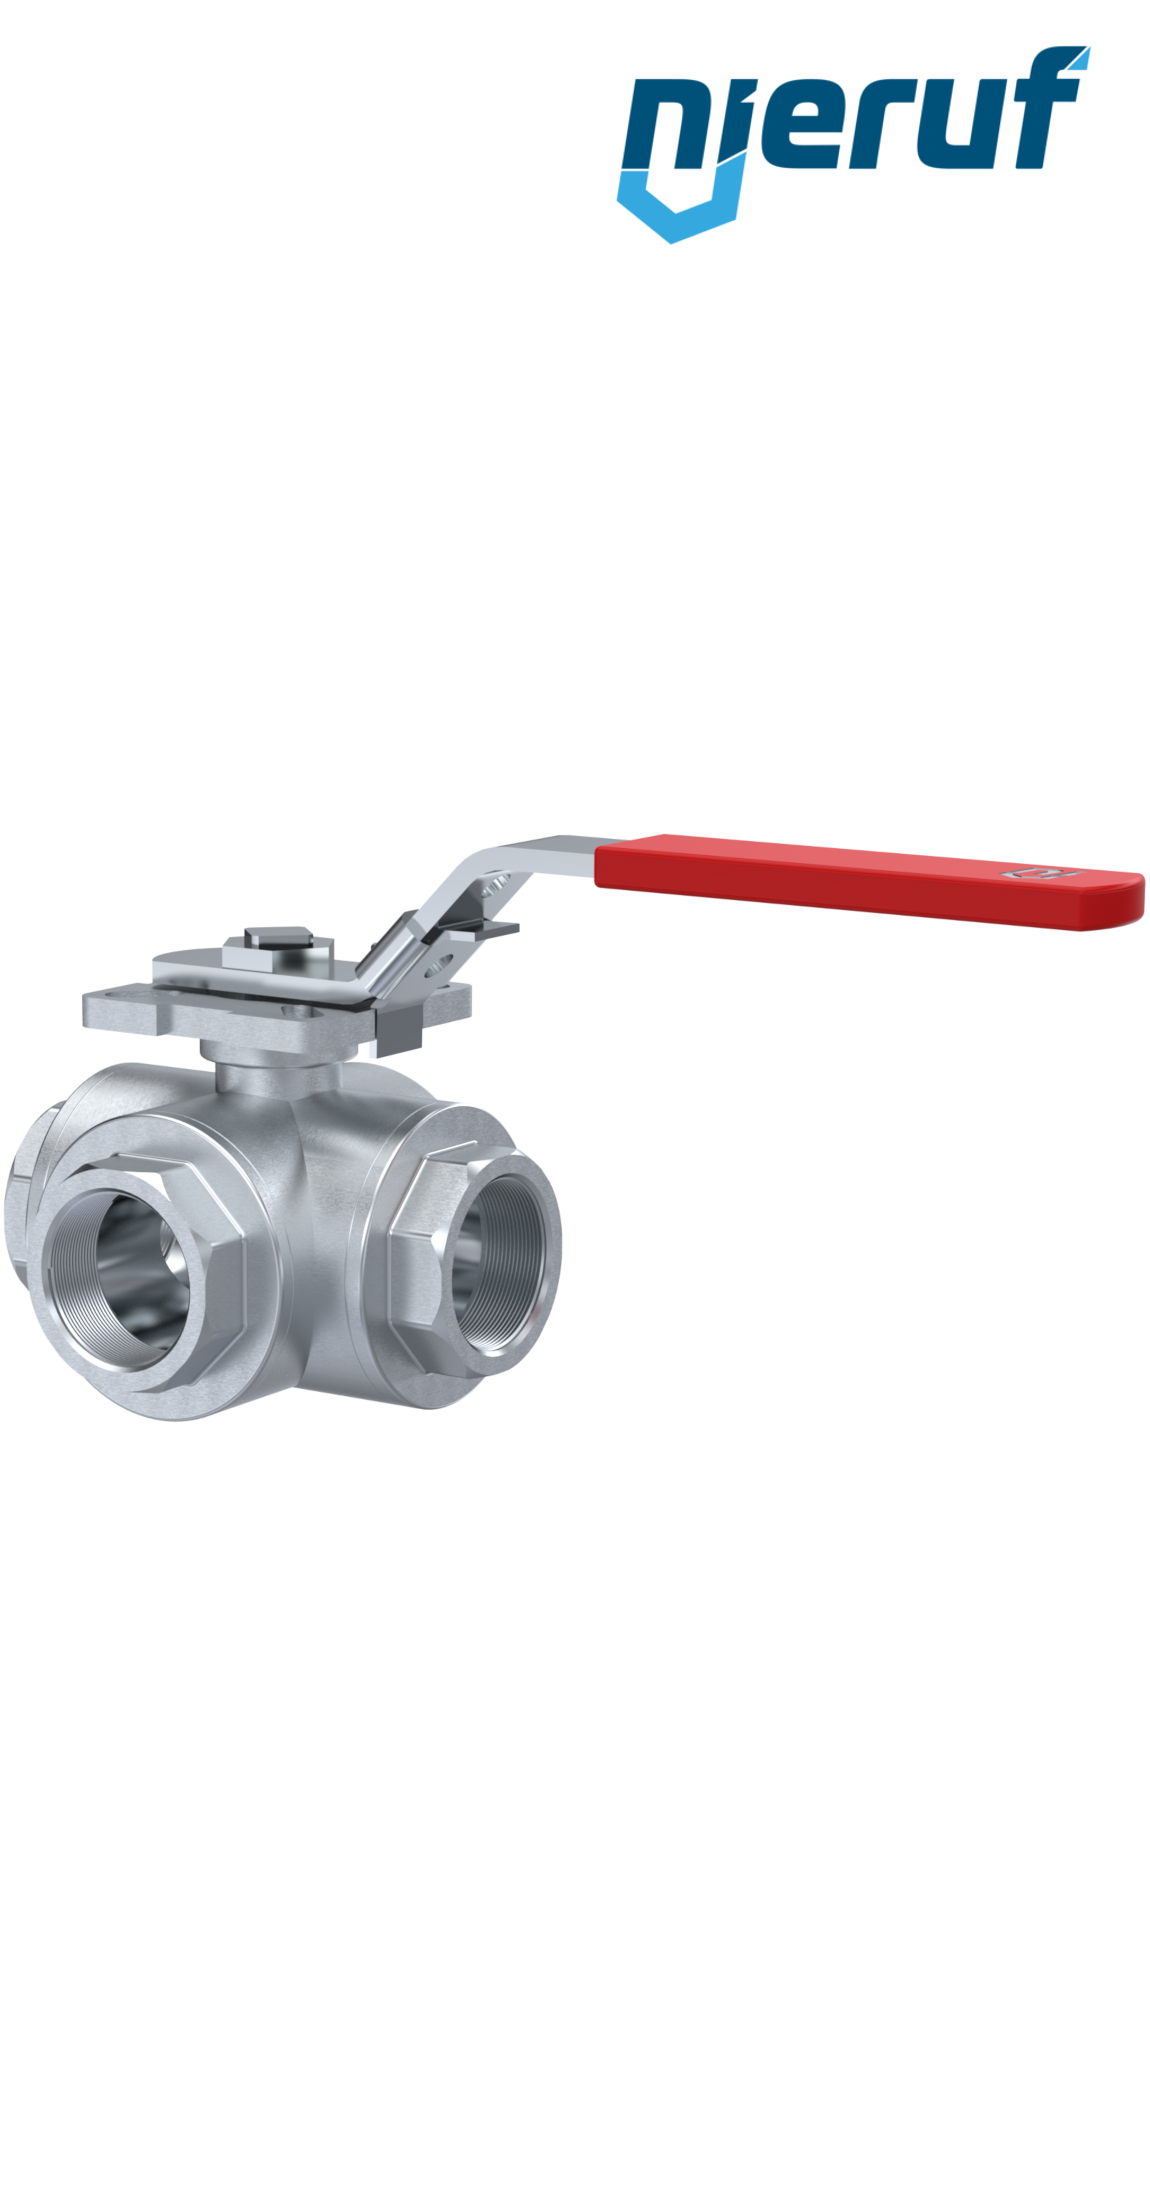 3-way ball valve DN40 - 1 1/2" inch GK09 stainless steel L drilling